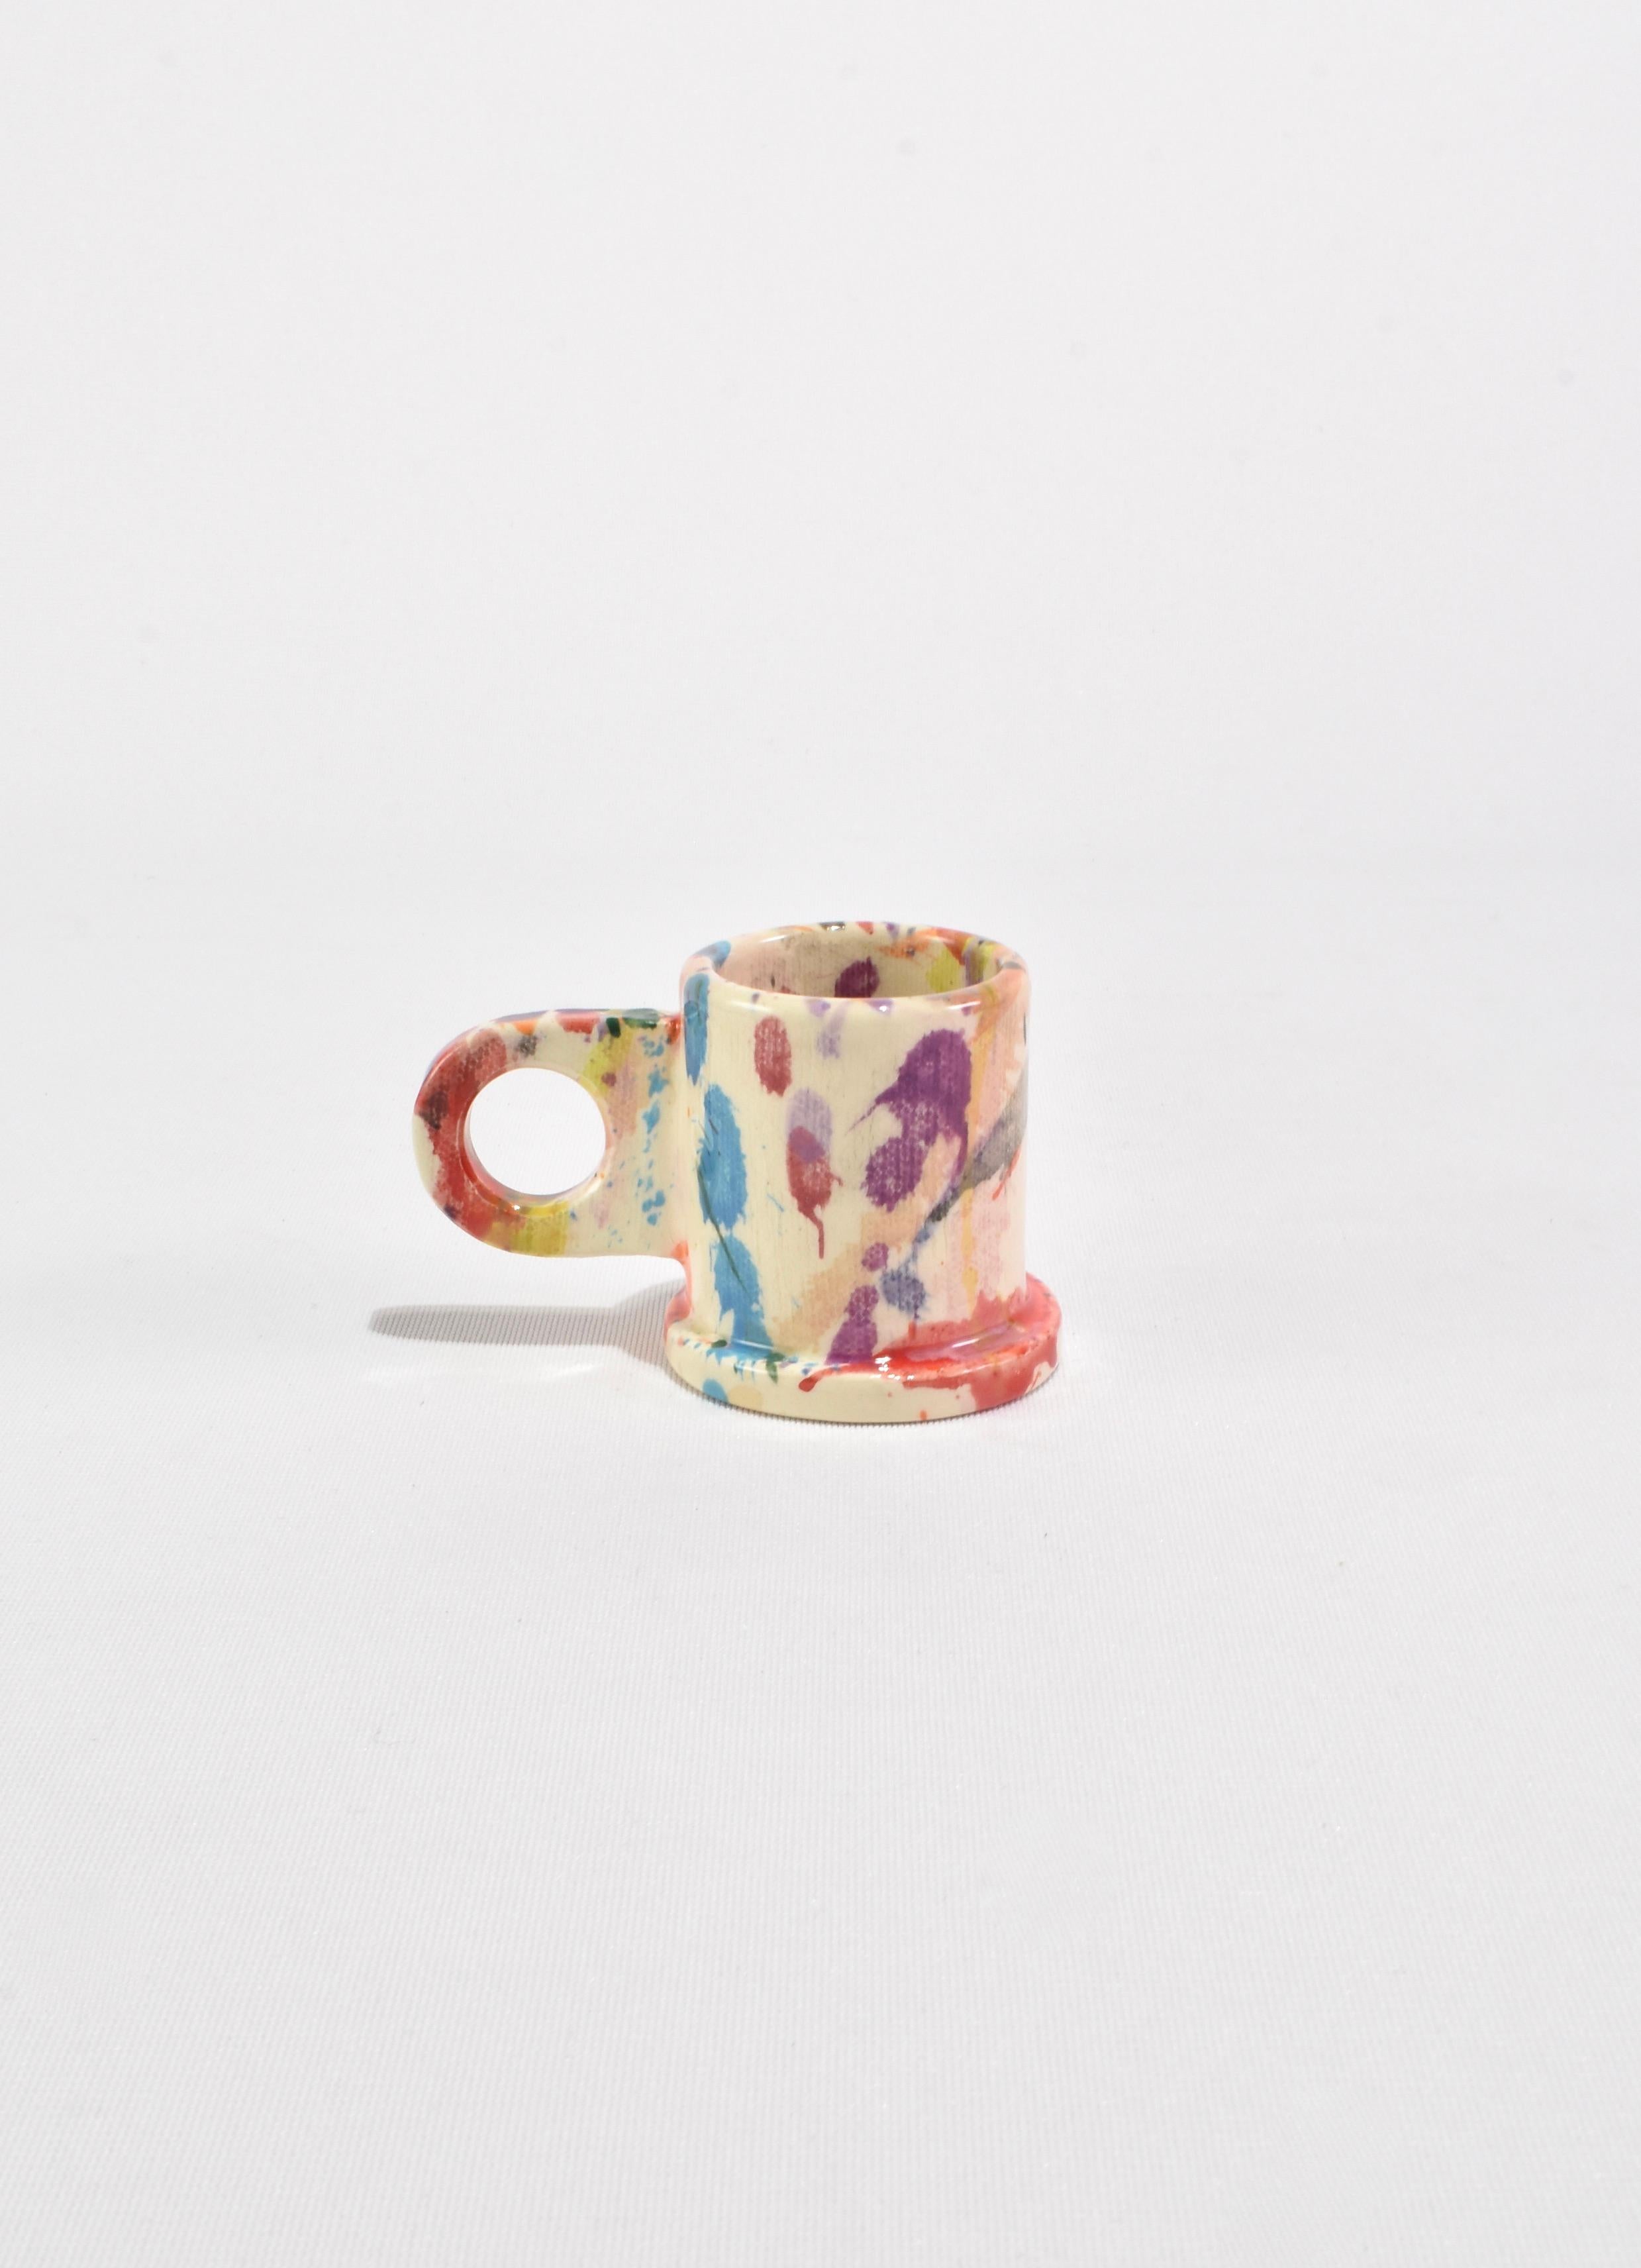 One-of-a-kind Espresso Splatter Mugs designed by Peter Shire. These functional and sculptural mugs are crafted by Echo Park Pottery in Los Angeles using slab construction and individually hand-painted. Stamped on base: EXP 2023. Sold